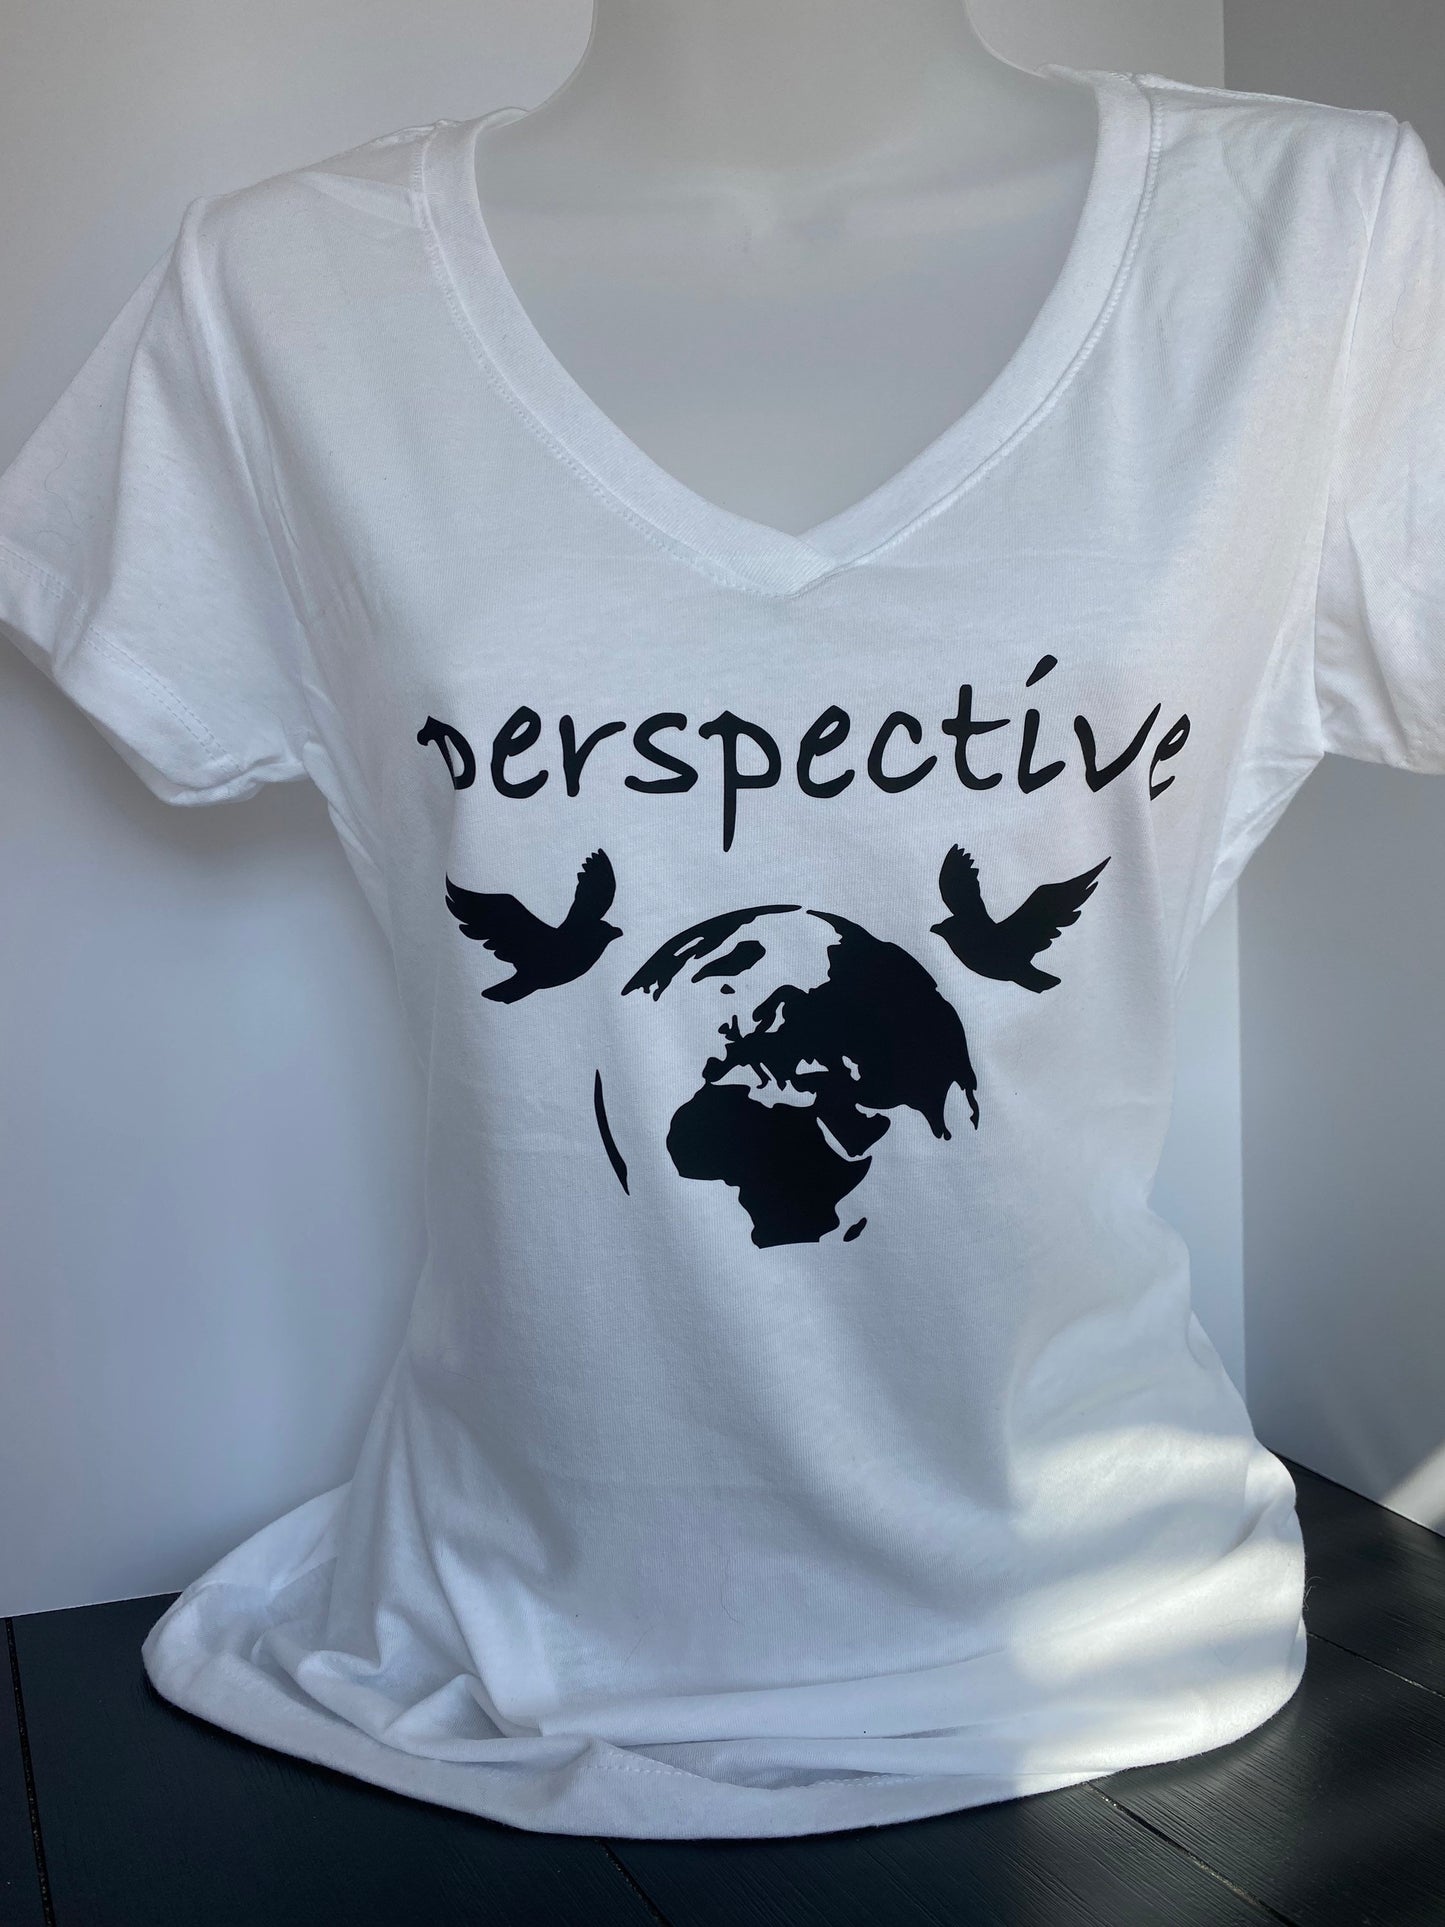 Perspective T-shirt, Tank, Hoodie or Tote, Peace t-shirt, Inspirational Message, Minimalist Clothing, Black and White